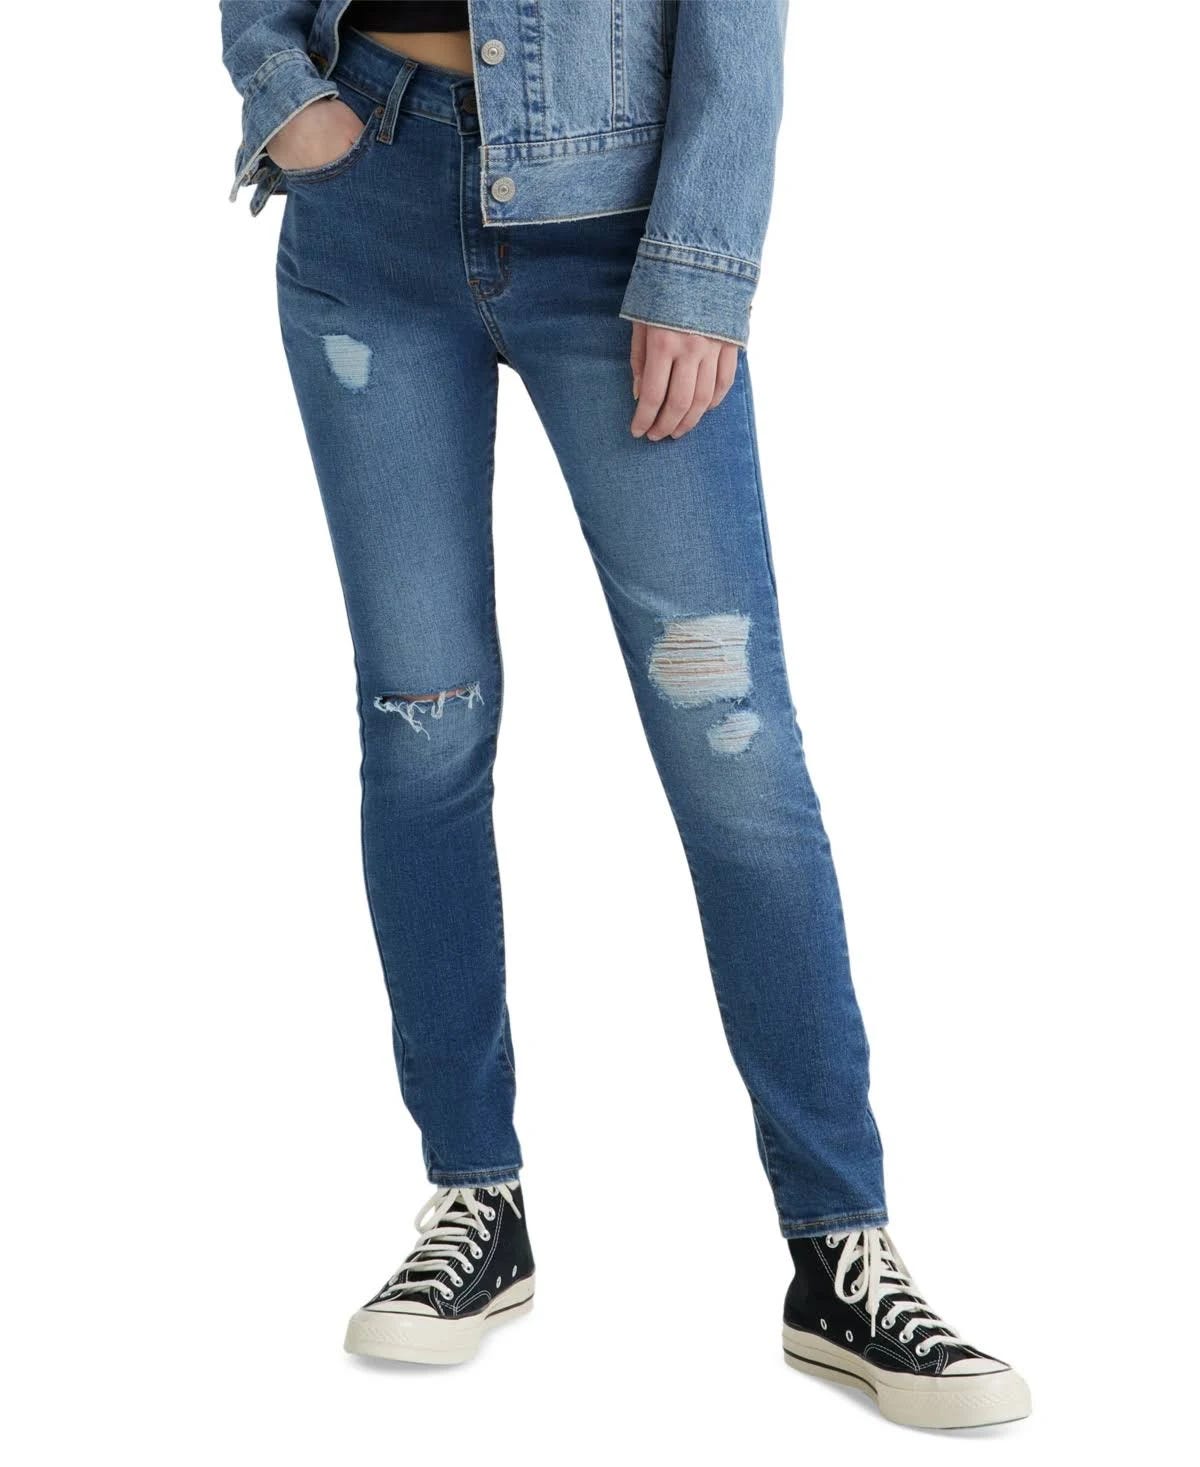 Levi's High-Rise Skinny Jeans: Women's Style and Comfort | Image